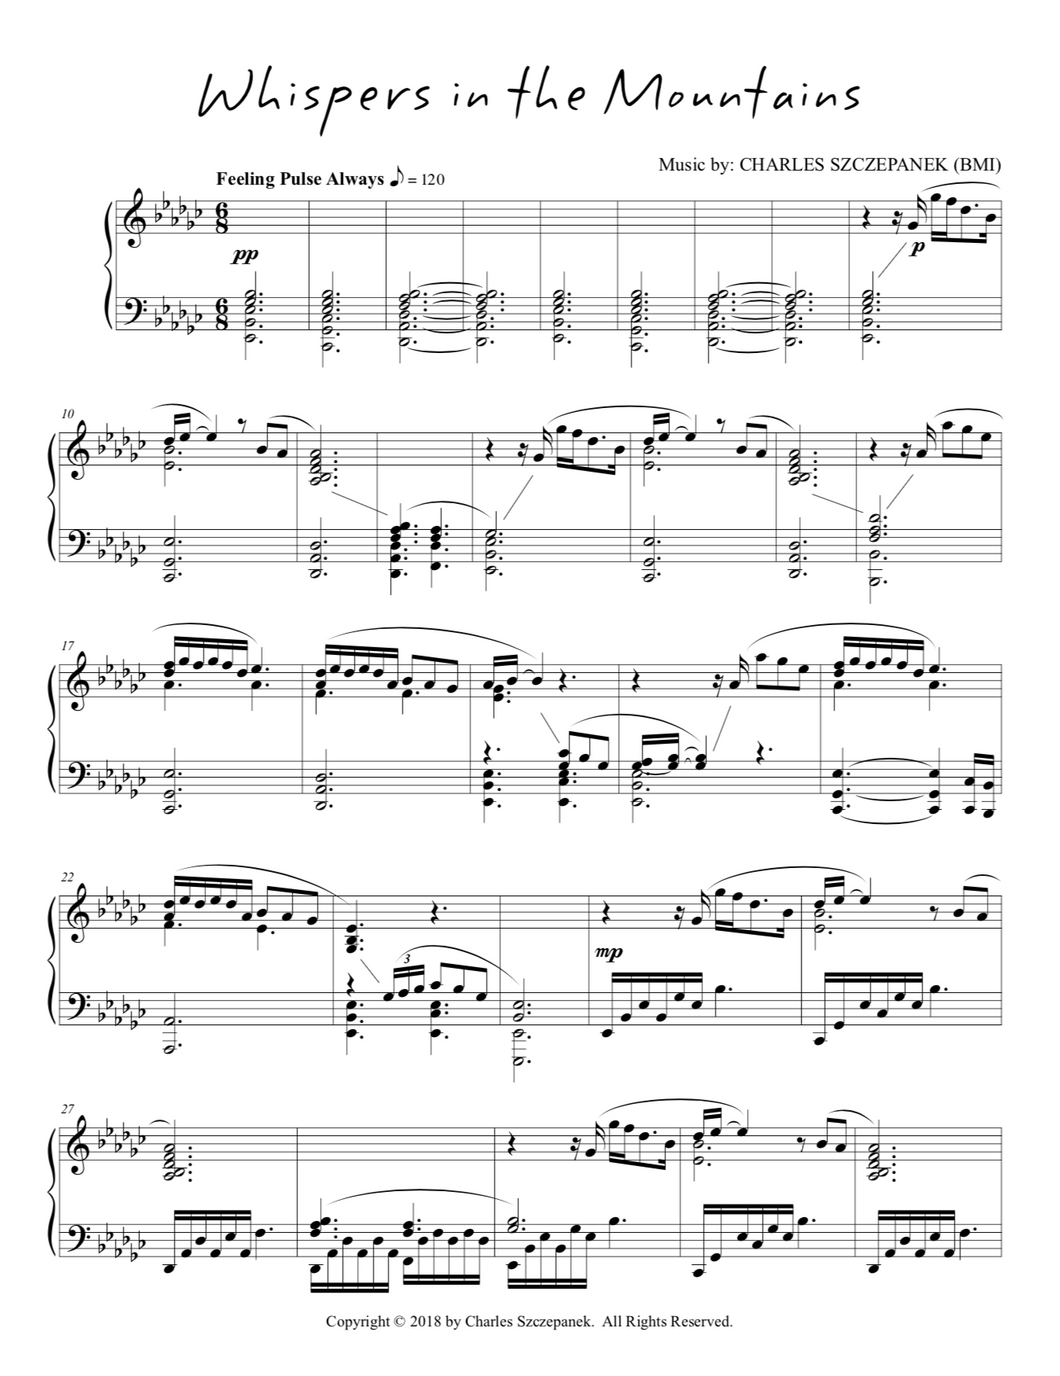 Whispers in the Mountains-Sheet Music for solo piano